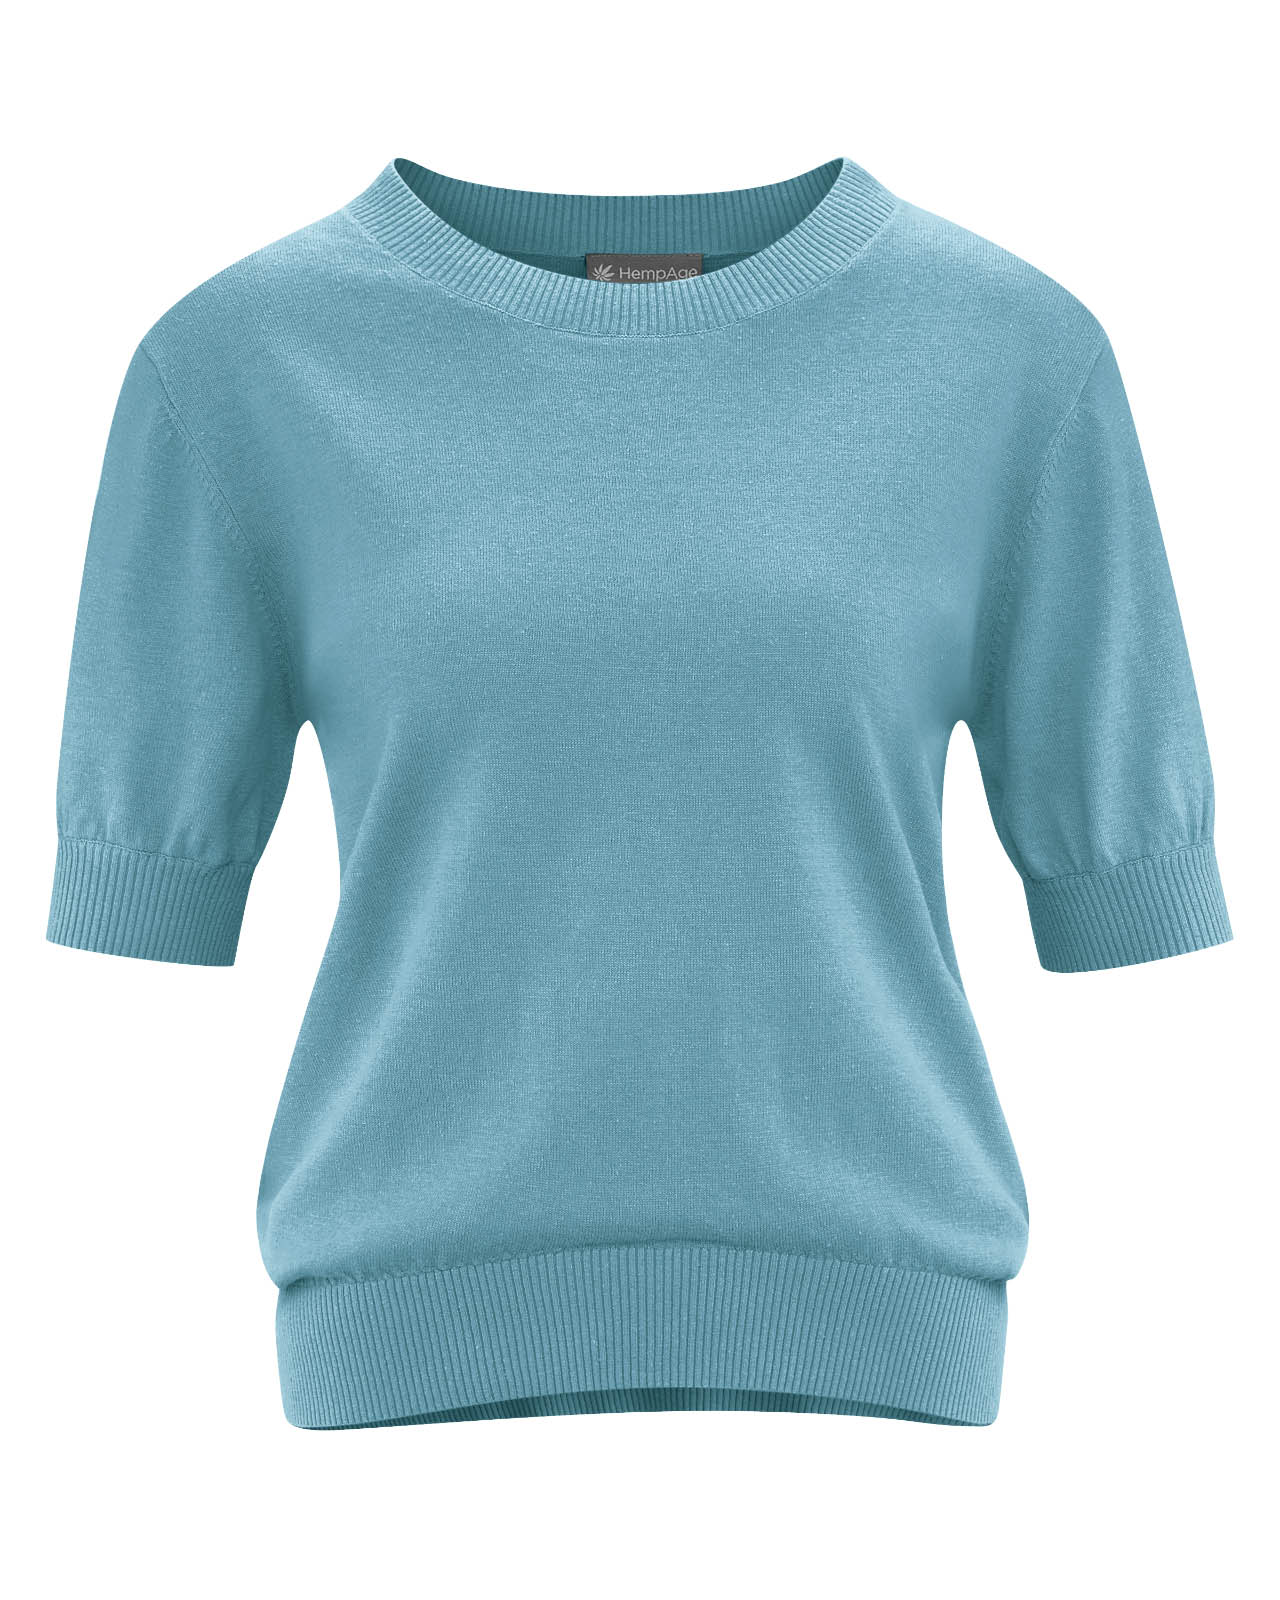 pull chanvre femme LZ324_wave